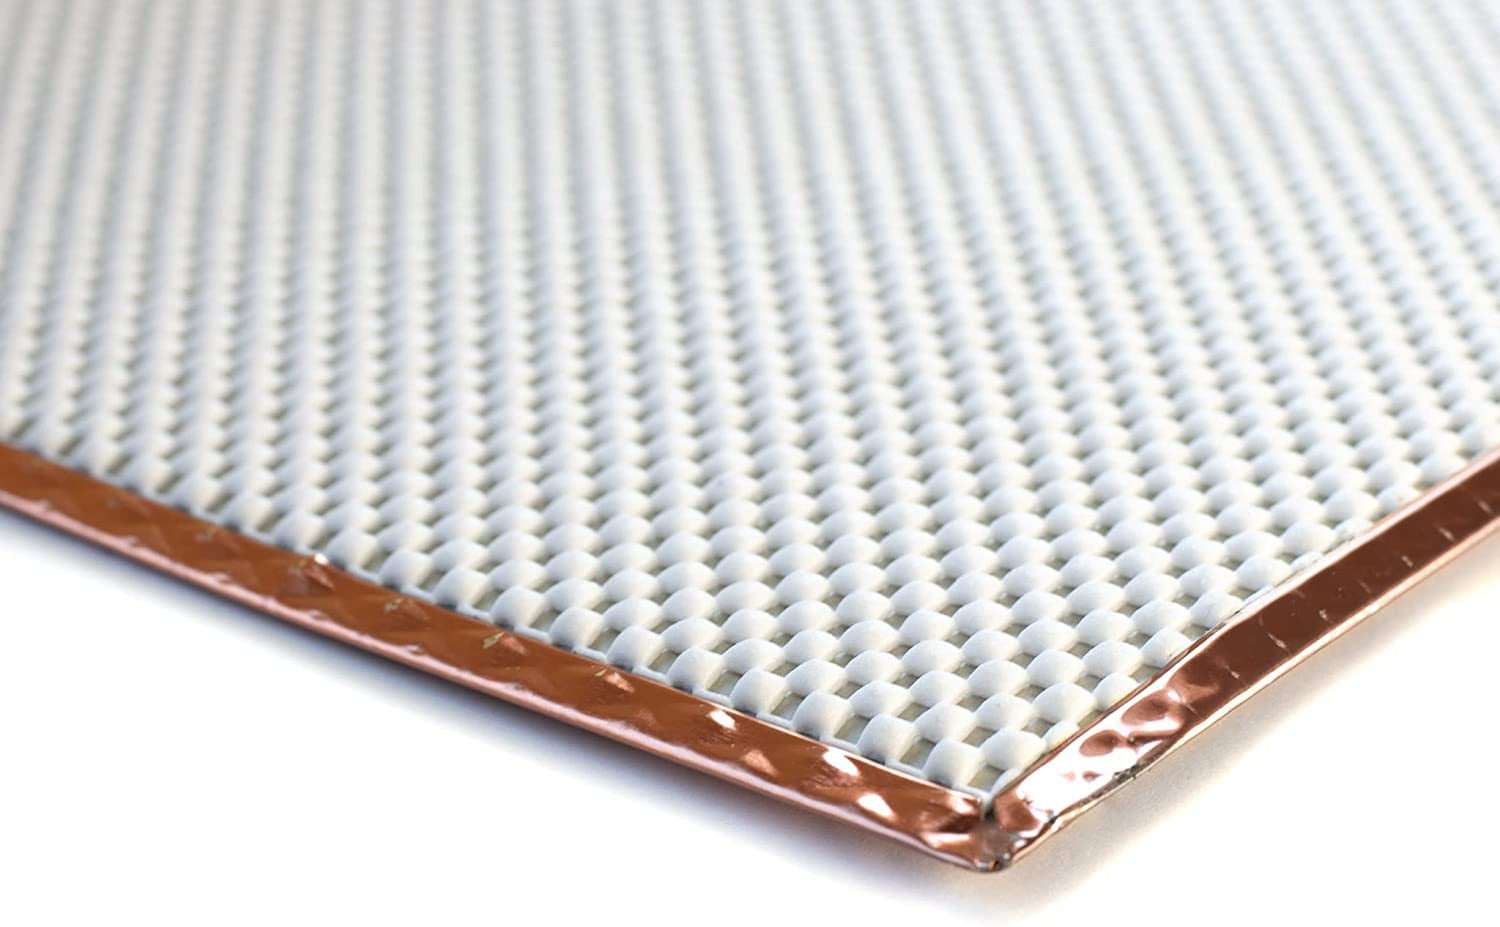 Counter Top Protector/Hot Pad, Metal Heat Resistant Mat, Non-Slip Rubber Backing - Copper Color (8 X 20)